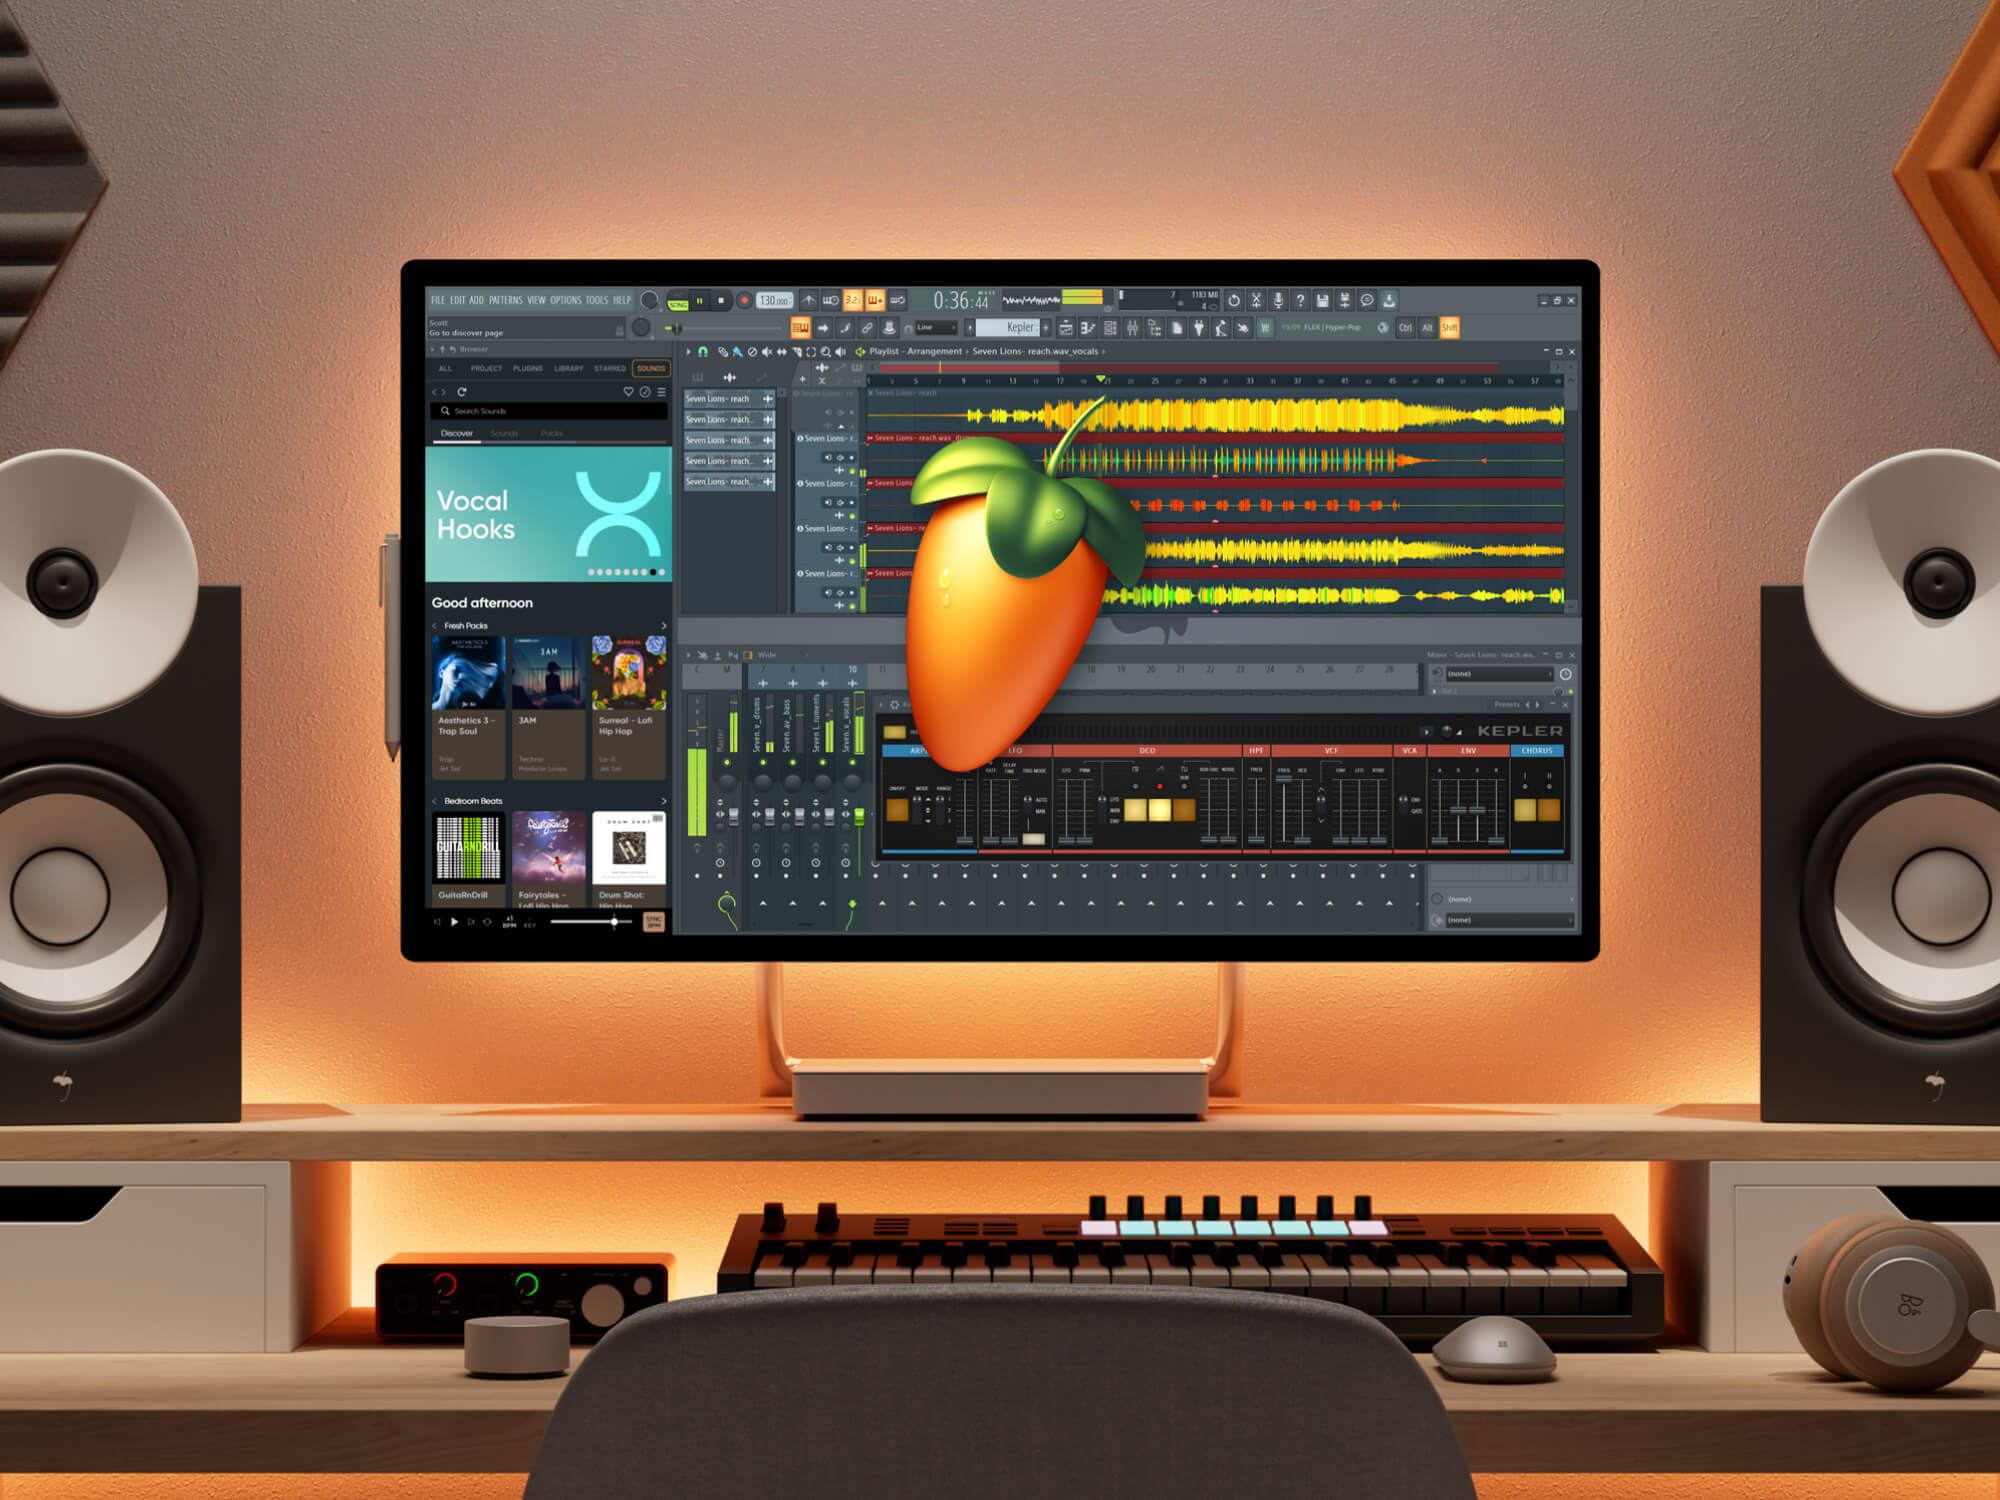 FL Studio open on a computer monitor. Orange lights glow behind the screen and the fruit logo is centred in the middle.